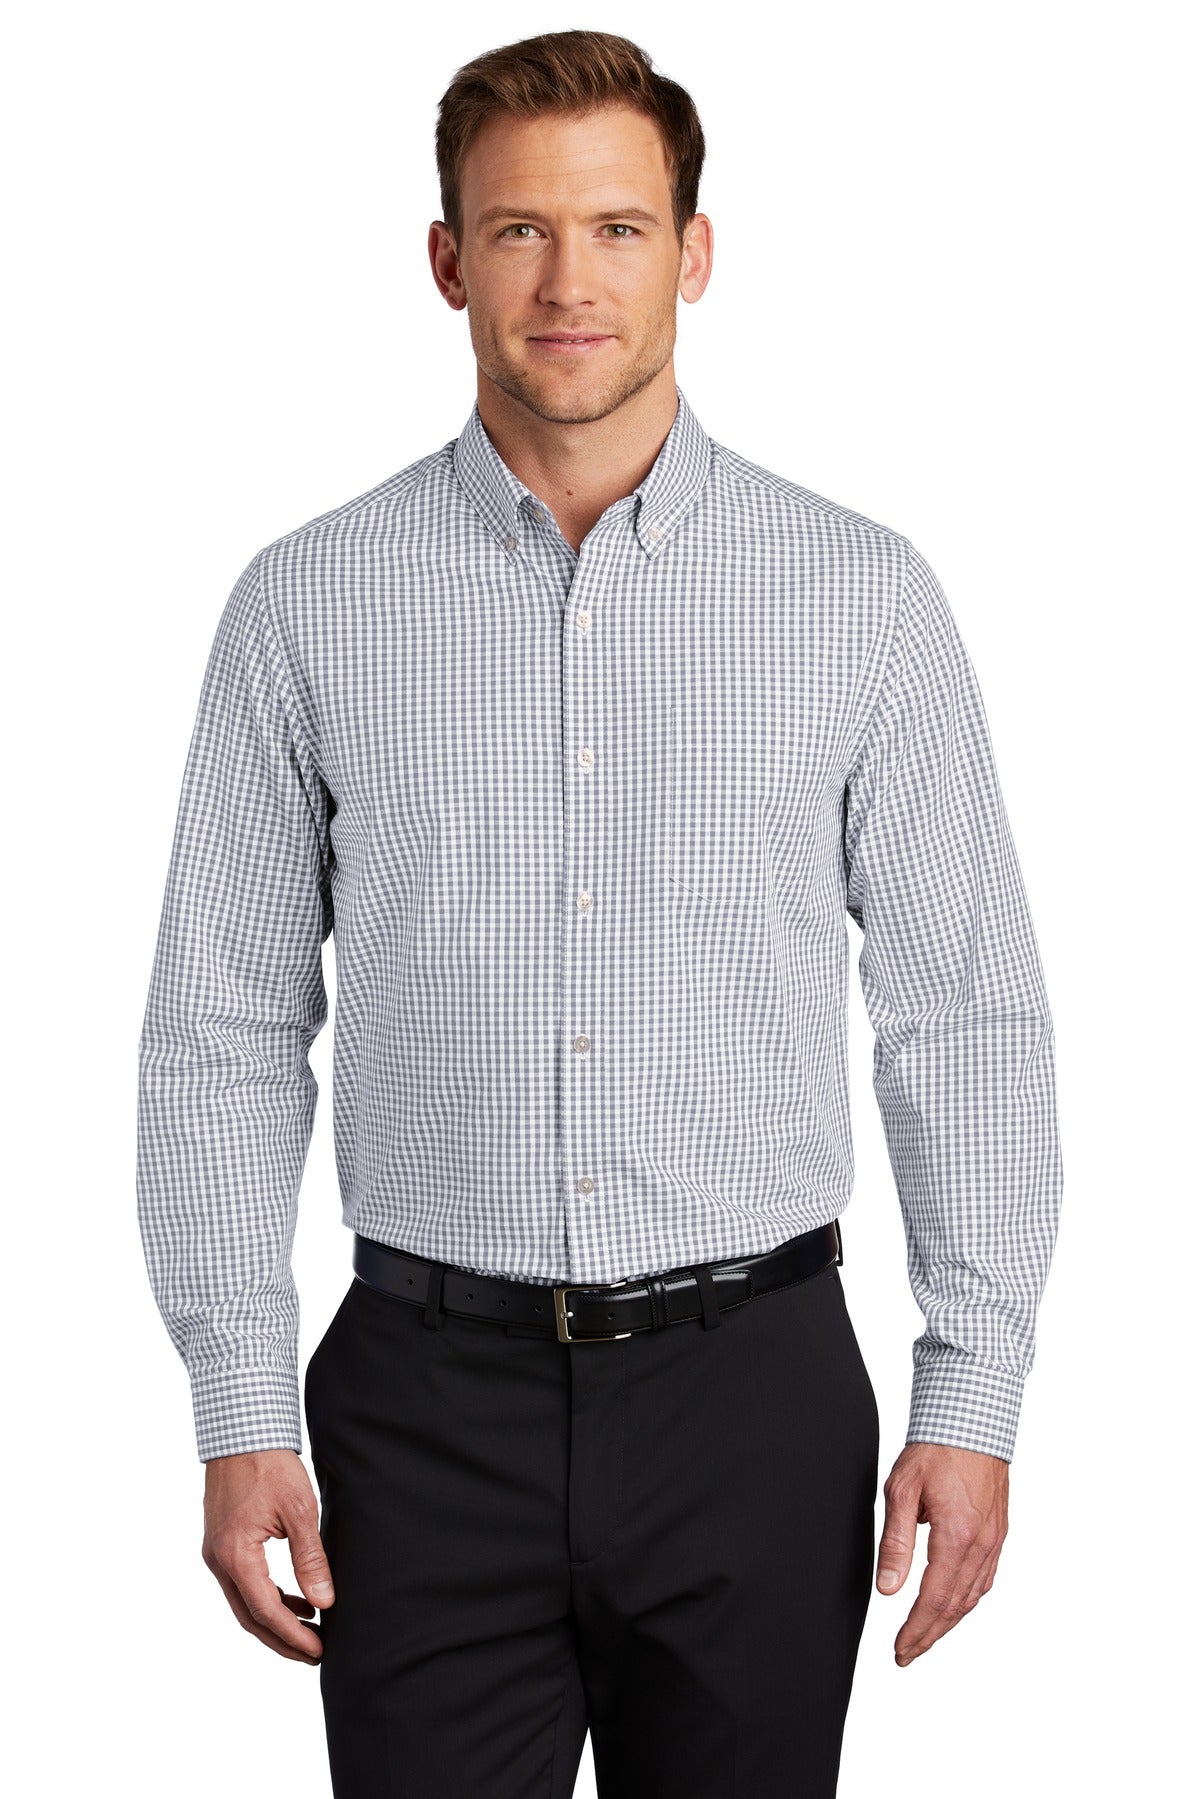 Port Authority ® Broadcloth Gingham Easy Care Shirt W644